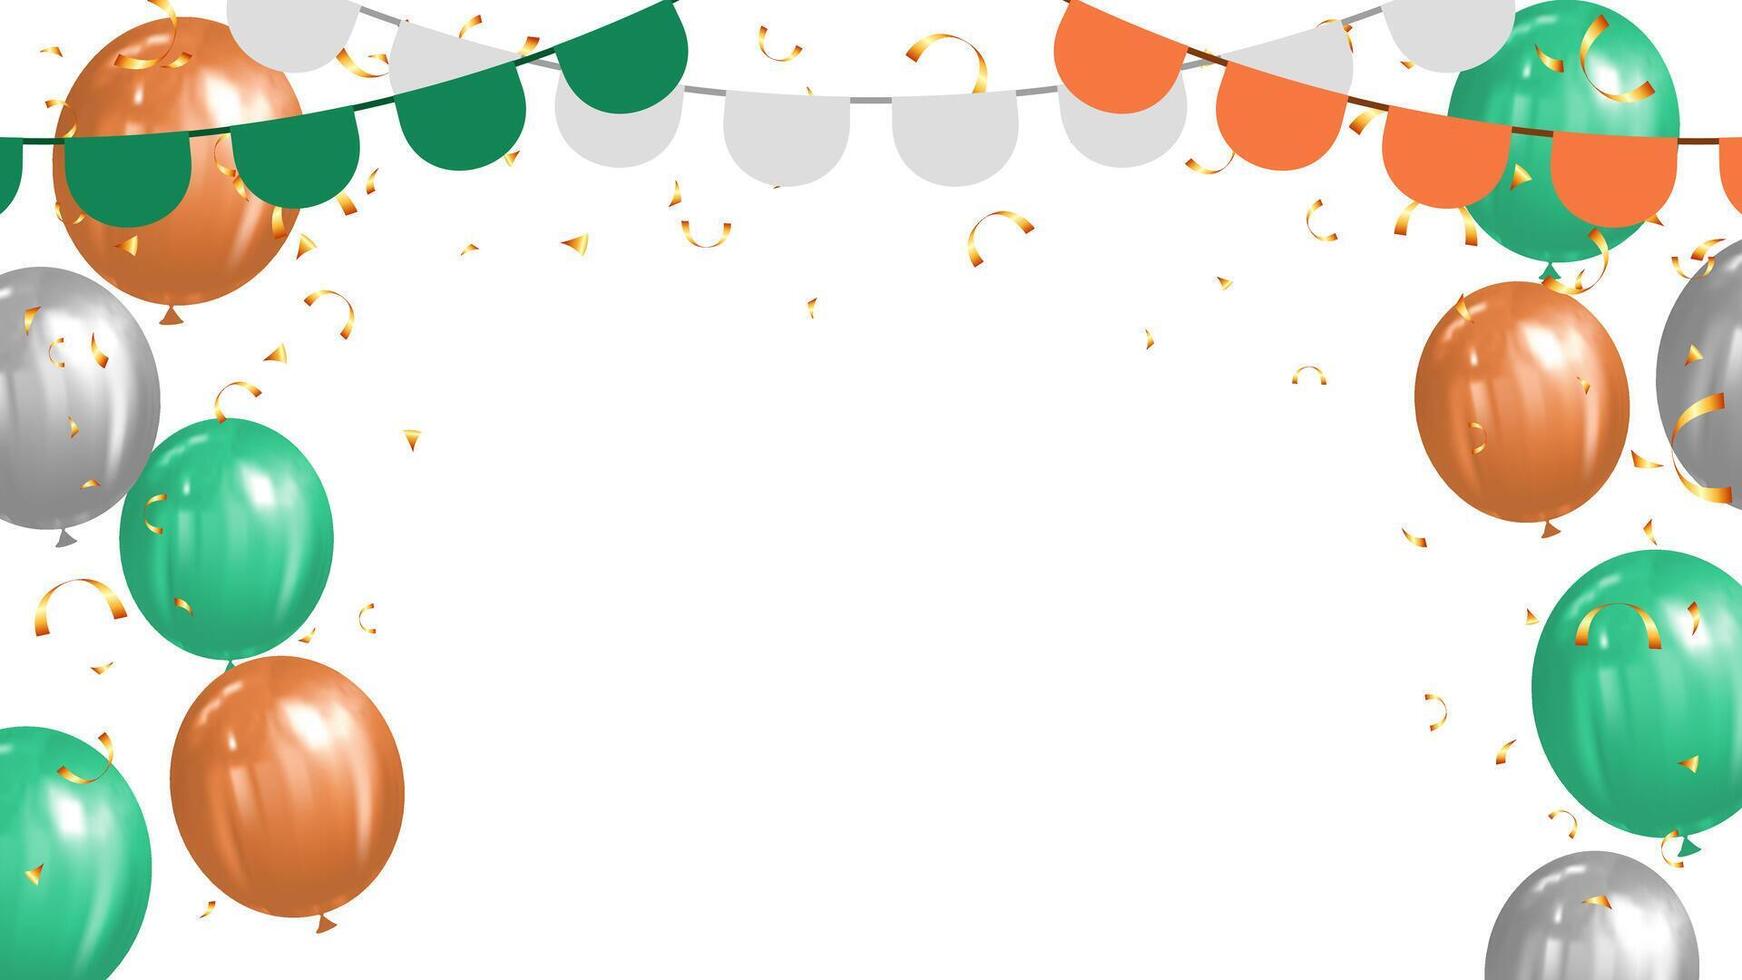 Banner with garland of flags, balloon and confetti for holiday, party, birthday, Ireland color concept vector illustration